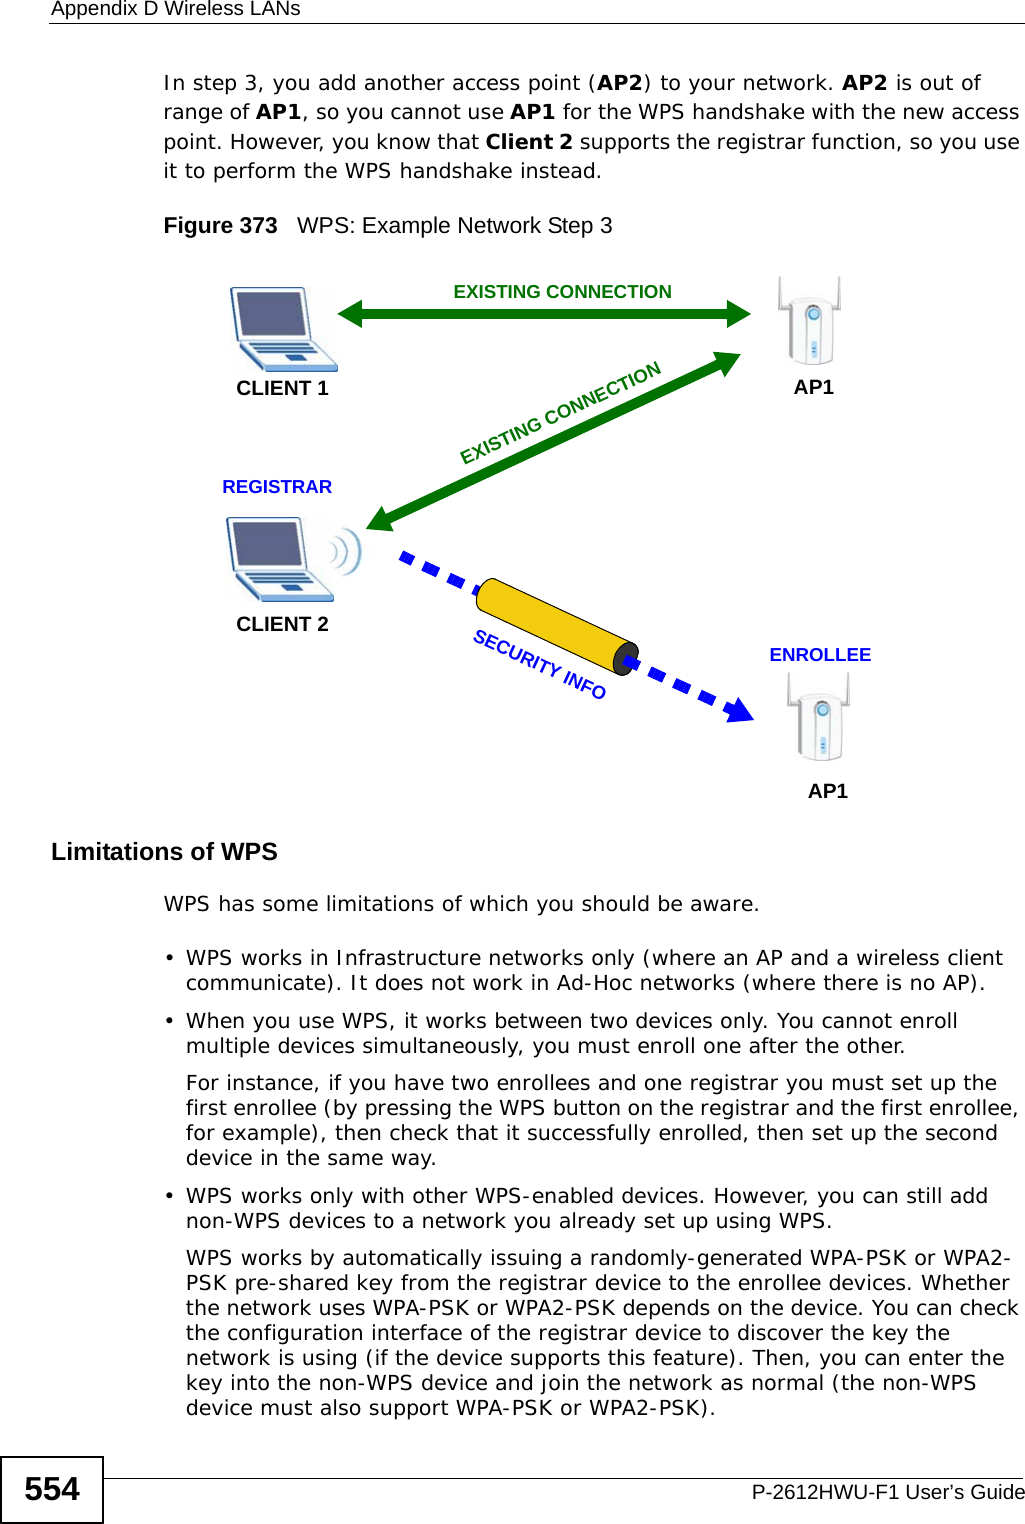 Appendix D Wireless LANsP-2612HWU-F1 User’s Guide554In step 3, you add another access point (AP2) to your network. AP2 is out of range of AP1, so you cannot use AP1 for the WPS handshake with the new access point. However, you know that Client 2 supports the registrar function, so you use it to perform the WPS handshake instead.Figure 373   WPS: Example Network Step 3Limitations of WPSWPS has some limitations of which you should be aware. • WPS works in Infrastructure networks only (where an AP and a wireless client communicate). It does not work in Ad-Hoc networks (where there is no AP).• When you use WPS, it works between two devices only. You cannot enroll multiple devices simultaneously, you must enroll one after the other. For instance, if you have two enrollees and one registrar you must set up the first enrollee (by pressing the WPS button on the registrar and the first enrollee, for example), then check that it successfully enrolled, then set up the second device in the same way.• WPS works only with other WPS-enabled devices. However, you can still add non-WPS devices to a network you already set up using WPS. WPS works by automatically issuing a randomly-generated WPA-PSK or WPA2-PSK pre-shared key from the registrar device to the enrollee devices. Whether the network uses WPA-PSK or WPA2-PSK depends on the device. You can check the configuration interface of the registrar device to discover the key the network is using (if the device supports this feature). Then, you can enter the key into the non-WPS device and join the network as normal (the non-WPS device must also support WPA-PSK or WPA2-PSK).CLIENT 1 AP1REGISTRARCLIENT 2EXISTING CONNECTIONSECURITY INFOENROLLEEAP1EXISTING CONNECTION